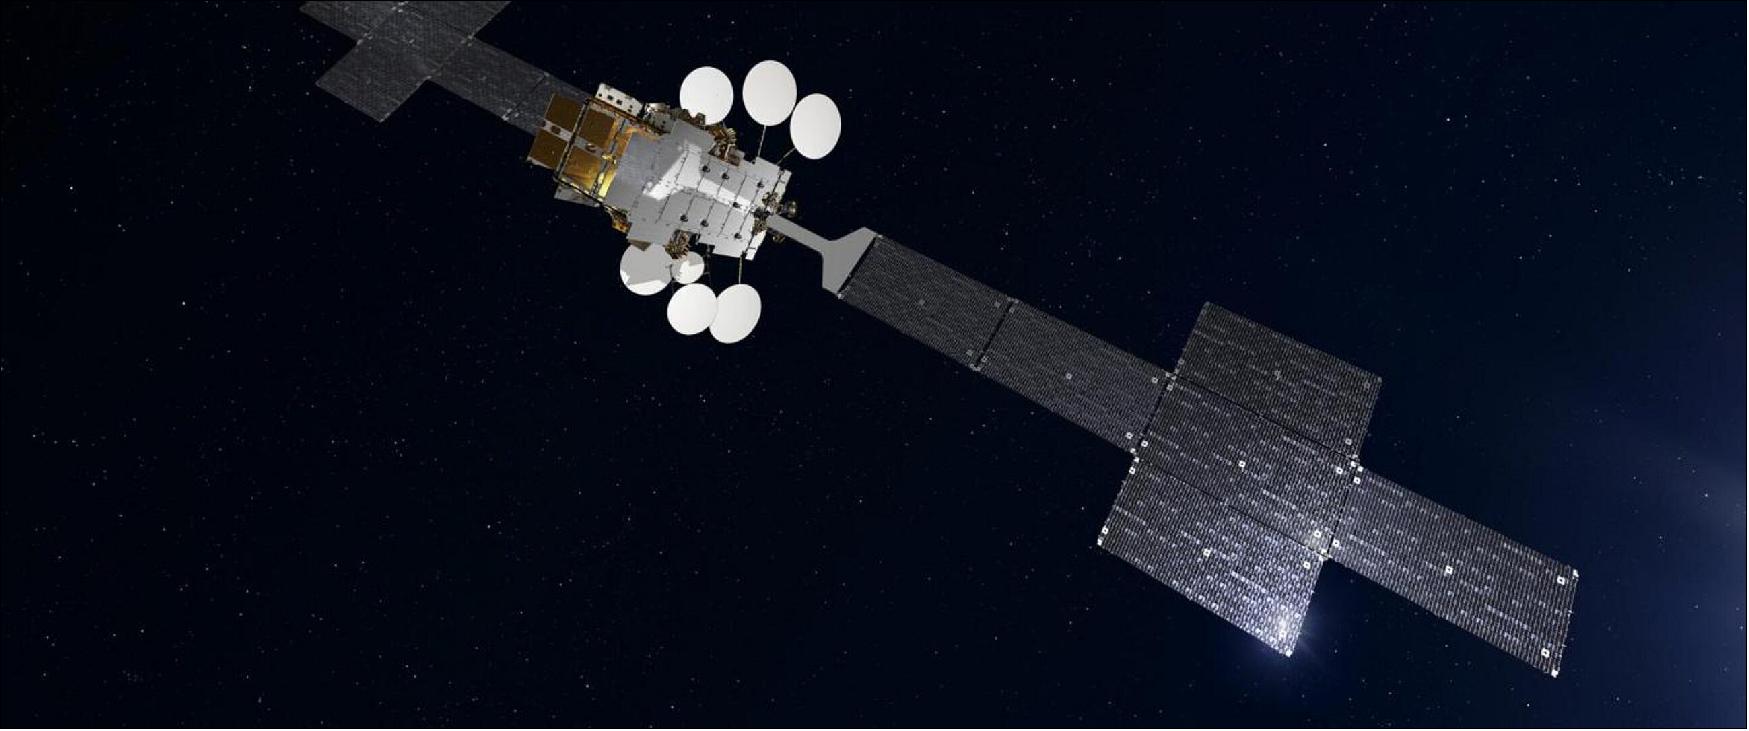 Figure 4: SES-17 Innovative data satellite enters commercial service. The satellite will provide broadband connectivity for commercial shipping, aviation, governments and enterprises through its operator, SES, as well connecting underserved areas and accelerating digital inclusion (image credit: SES)